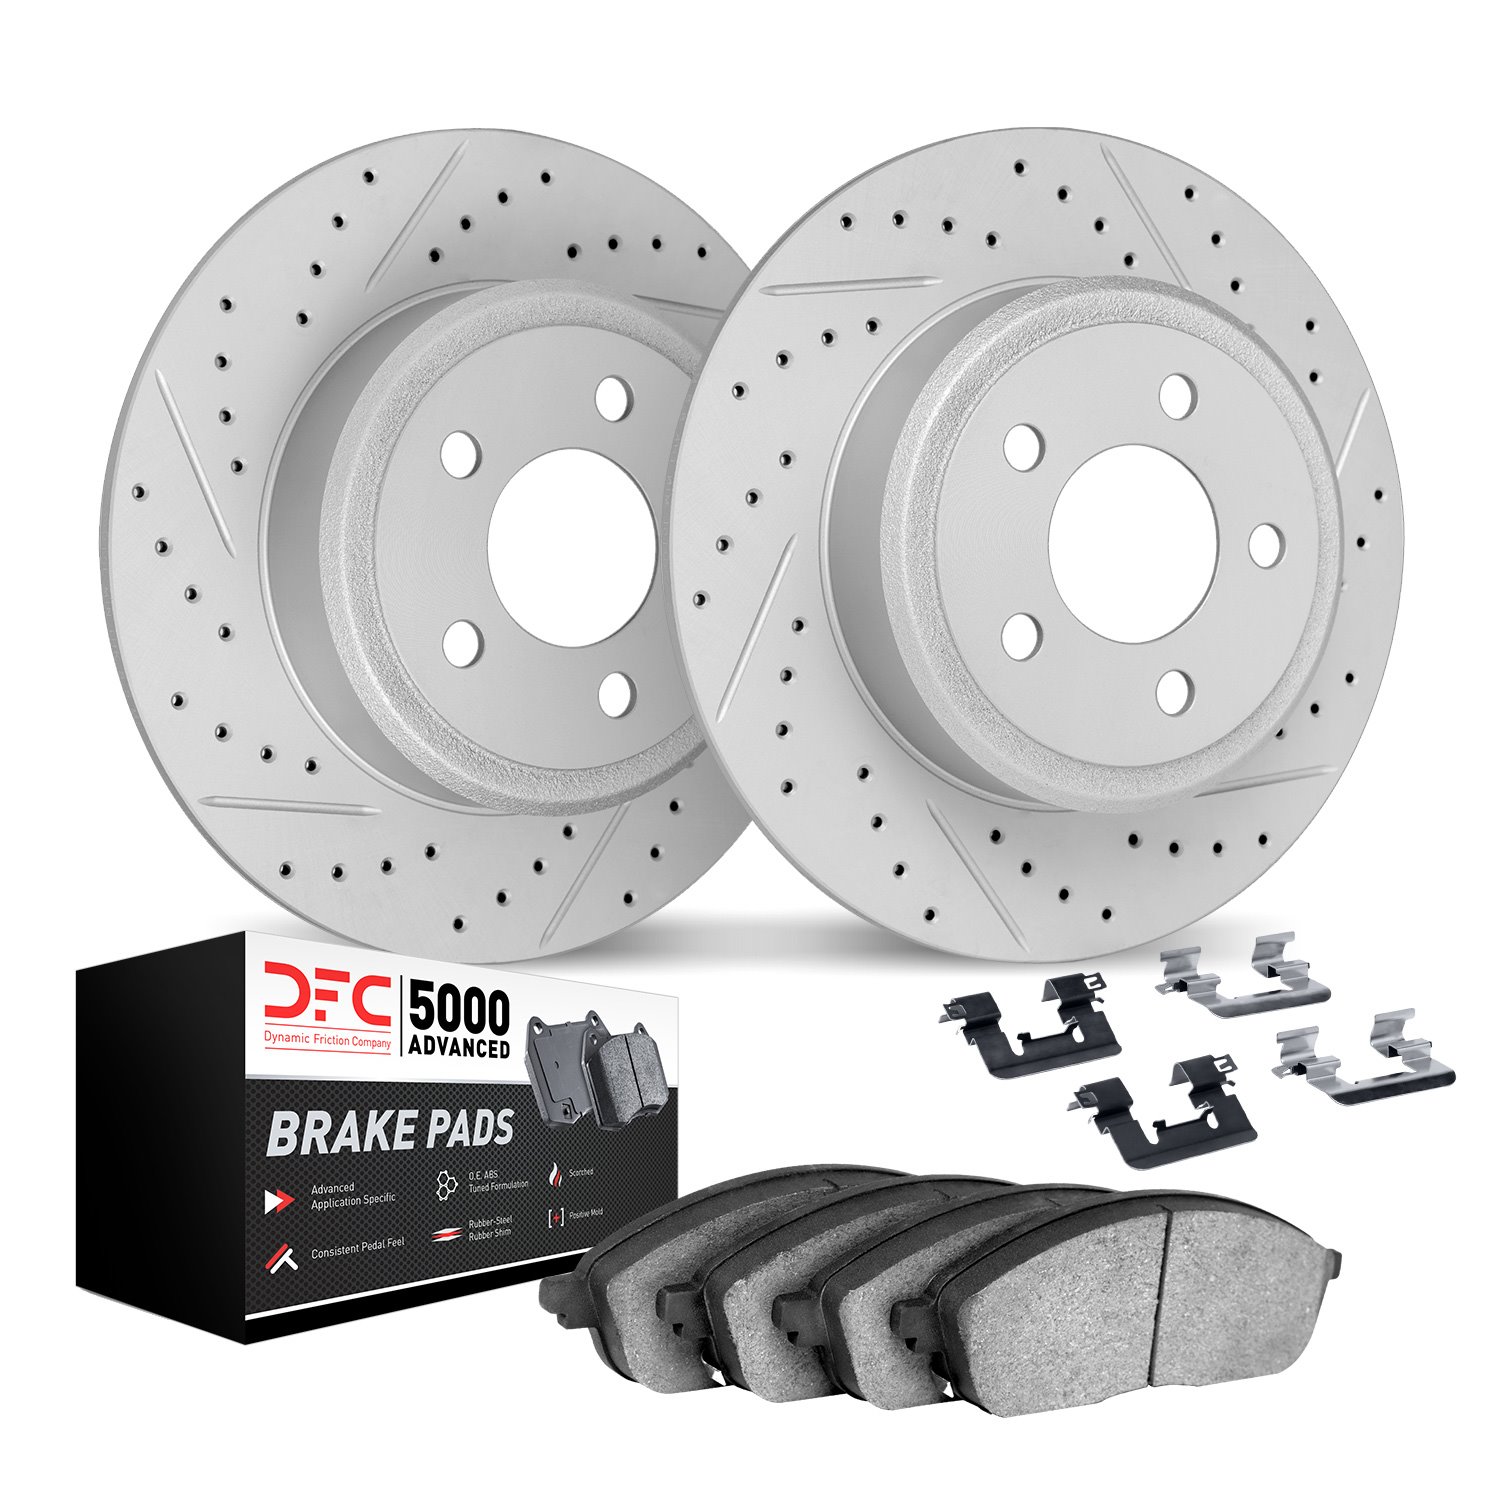 2512-59084 Geoperformance Drilled/Slotted Rotors w/5000 Advanced Brake Pads Kit & Hardware, Fits Select Acura/Honda, Position: R